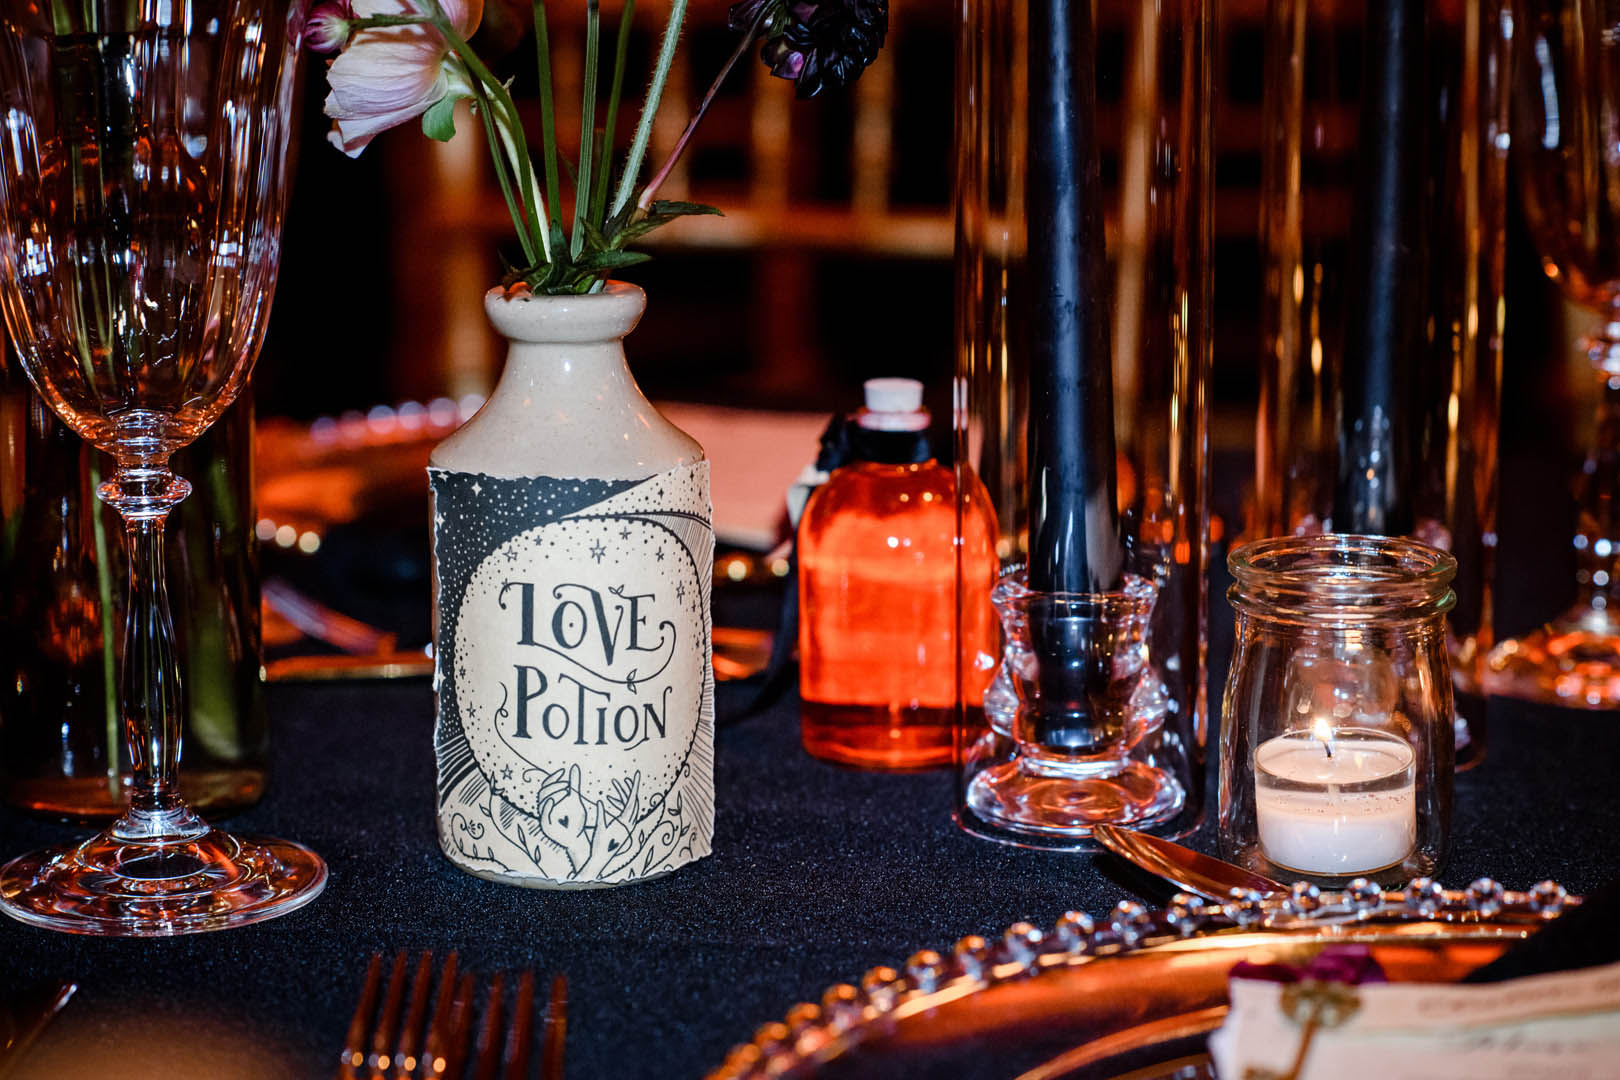 Gothic style wedding table with a quirky halloween style love potion bottle as a flower vase